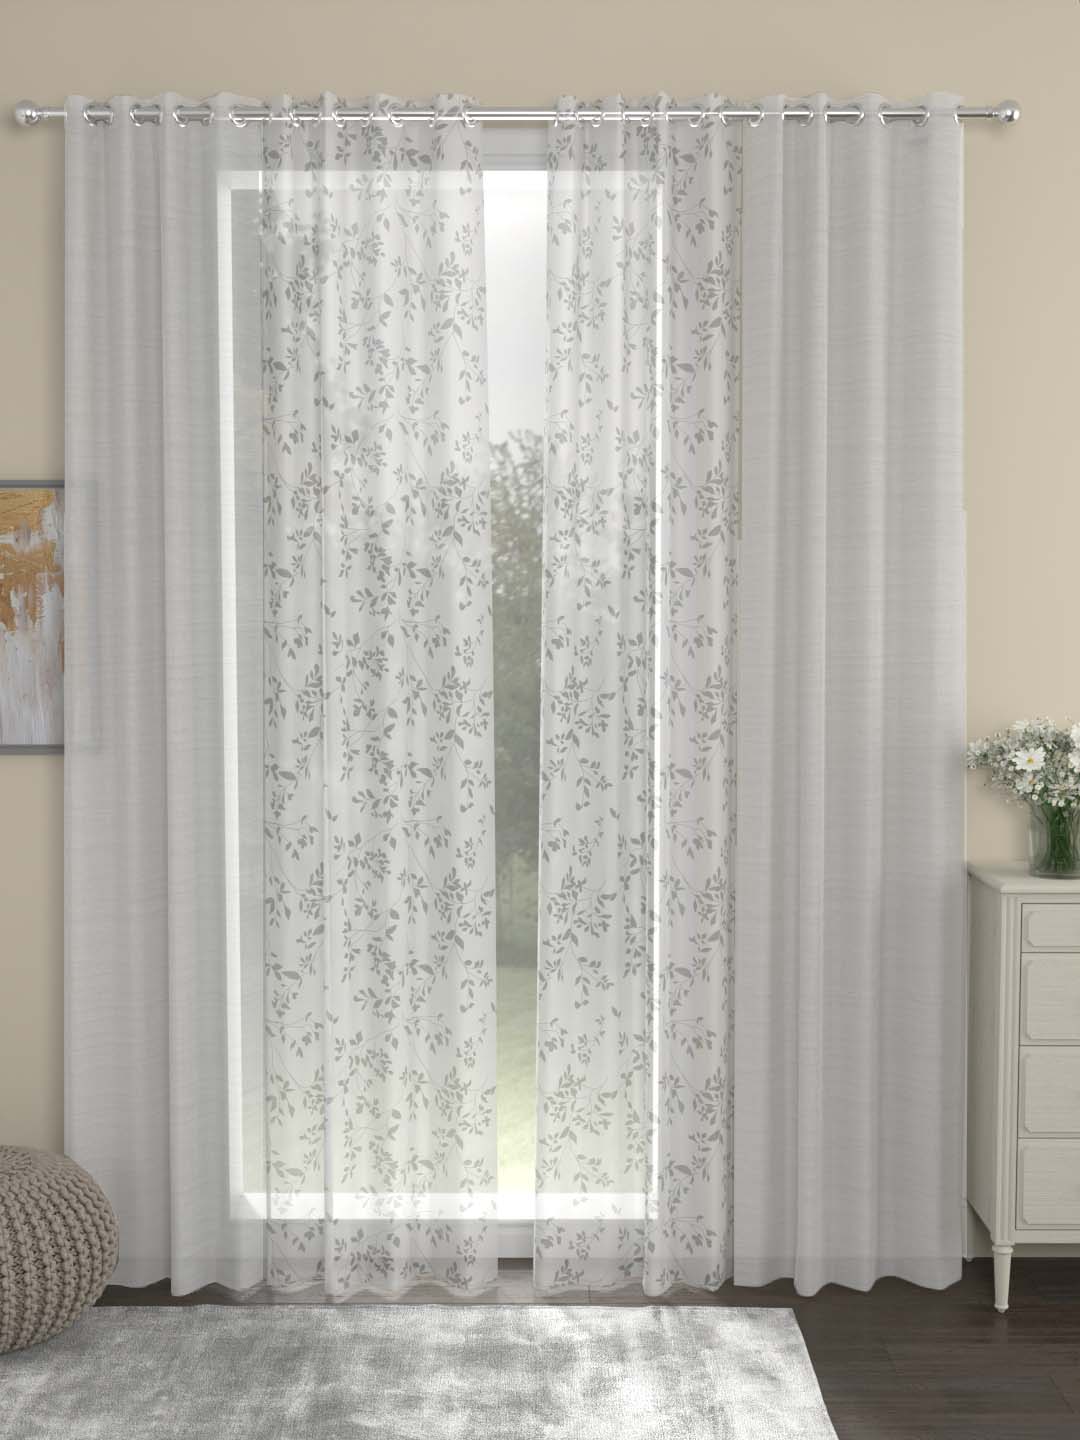 Dove Emily Pack of 4 Sheer Curtains